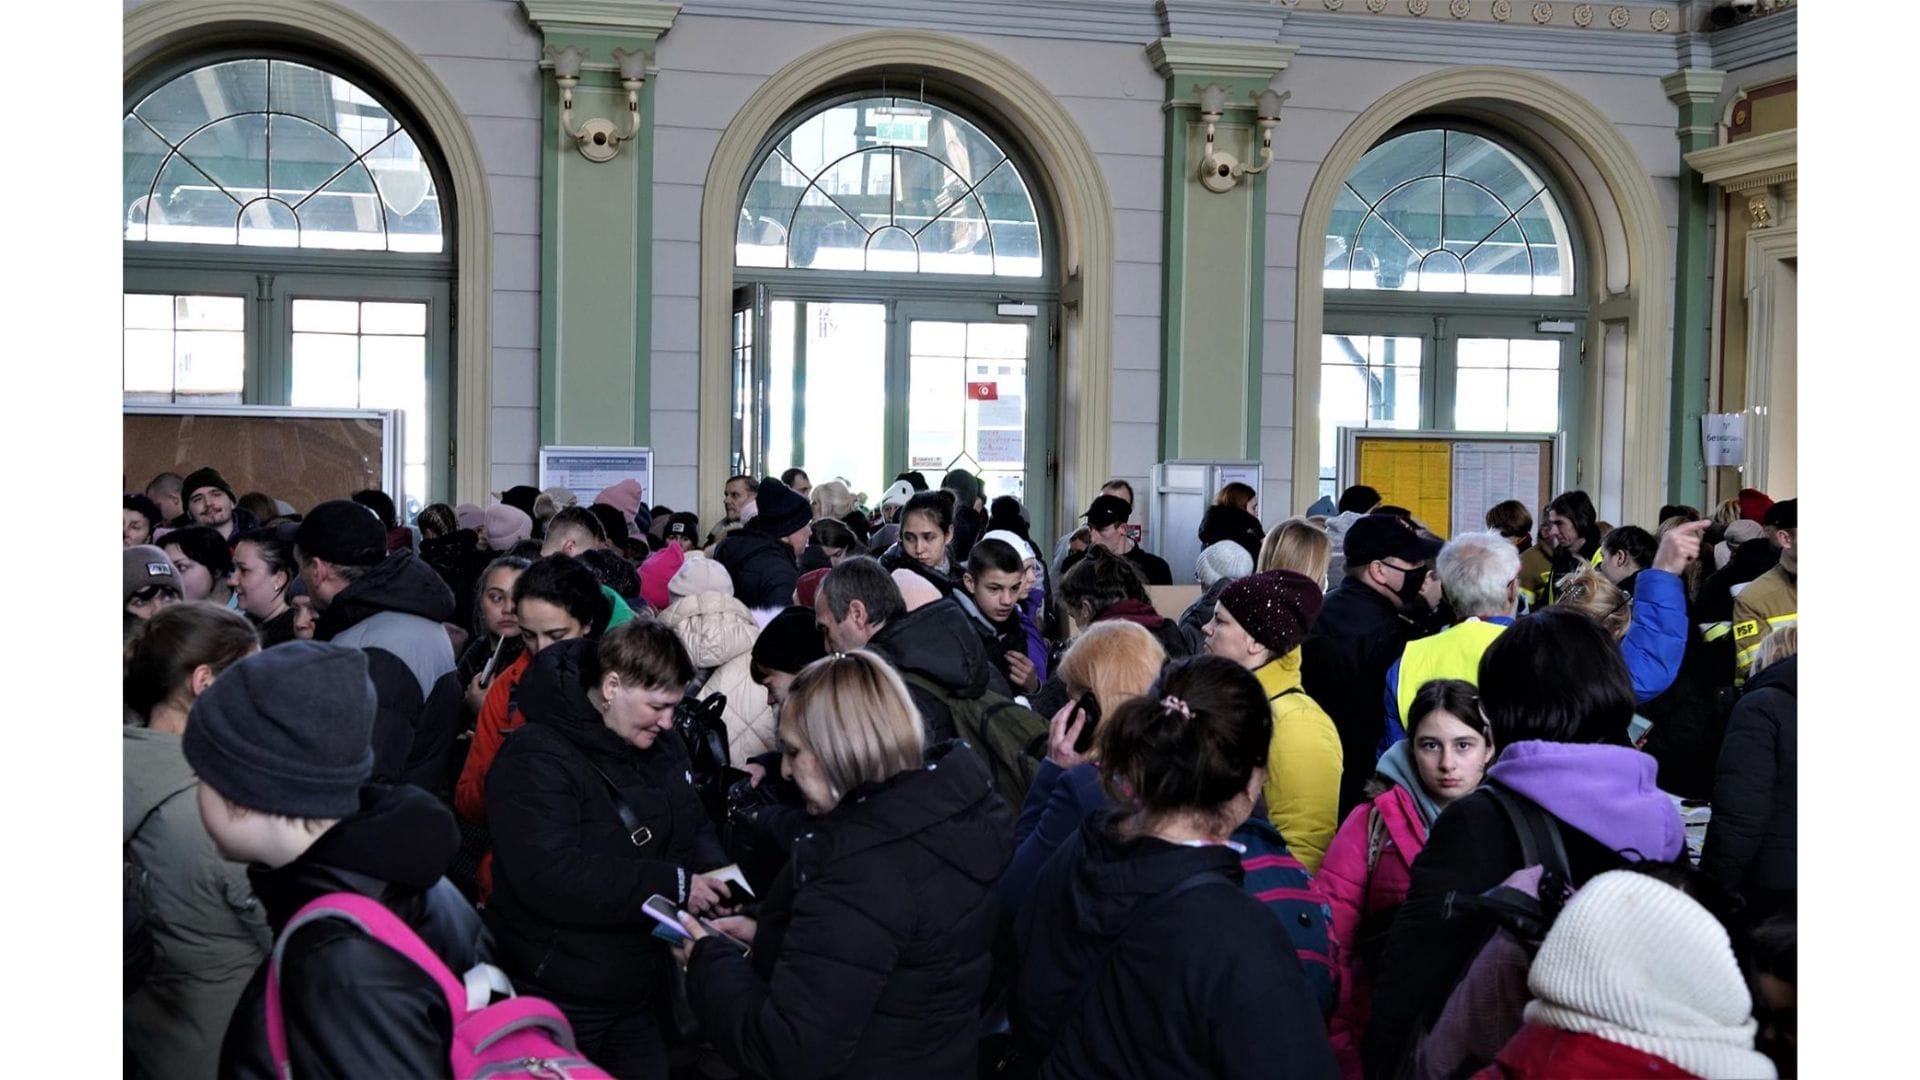 A crowd at a train station in Poland.